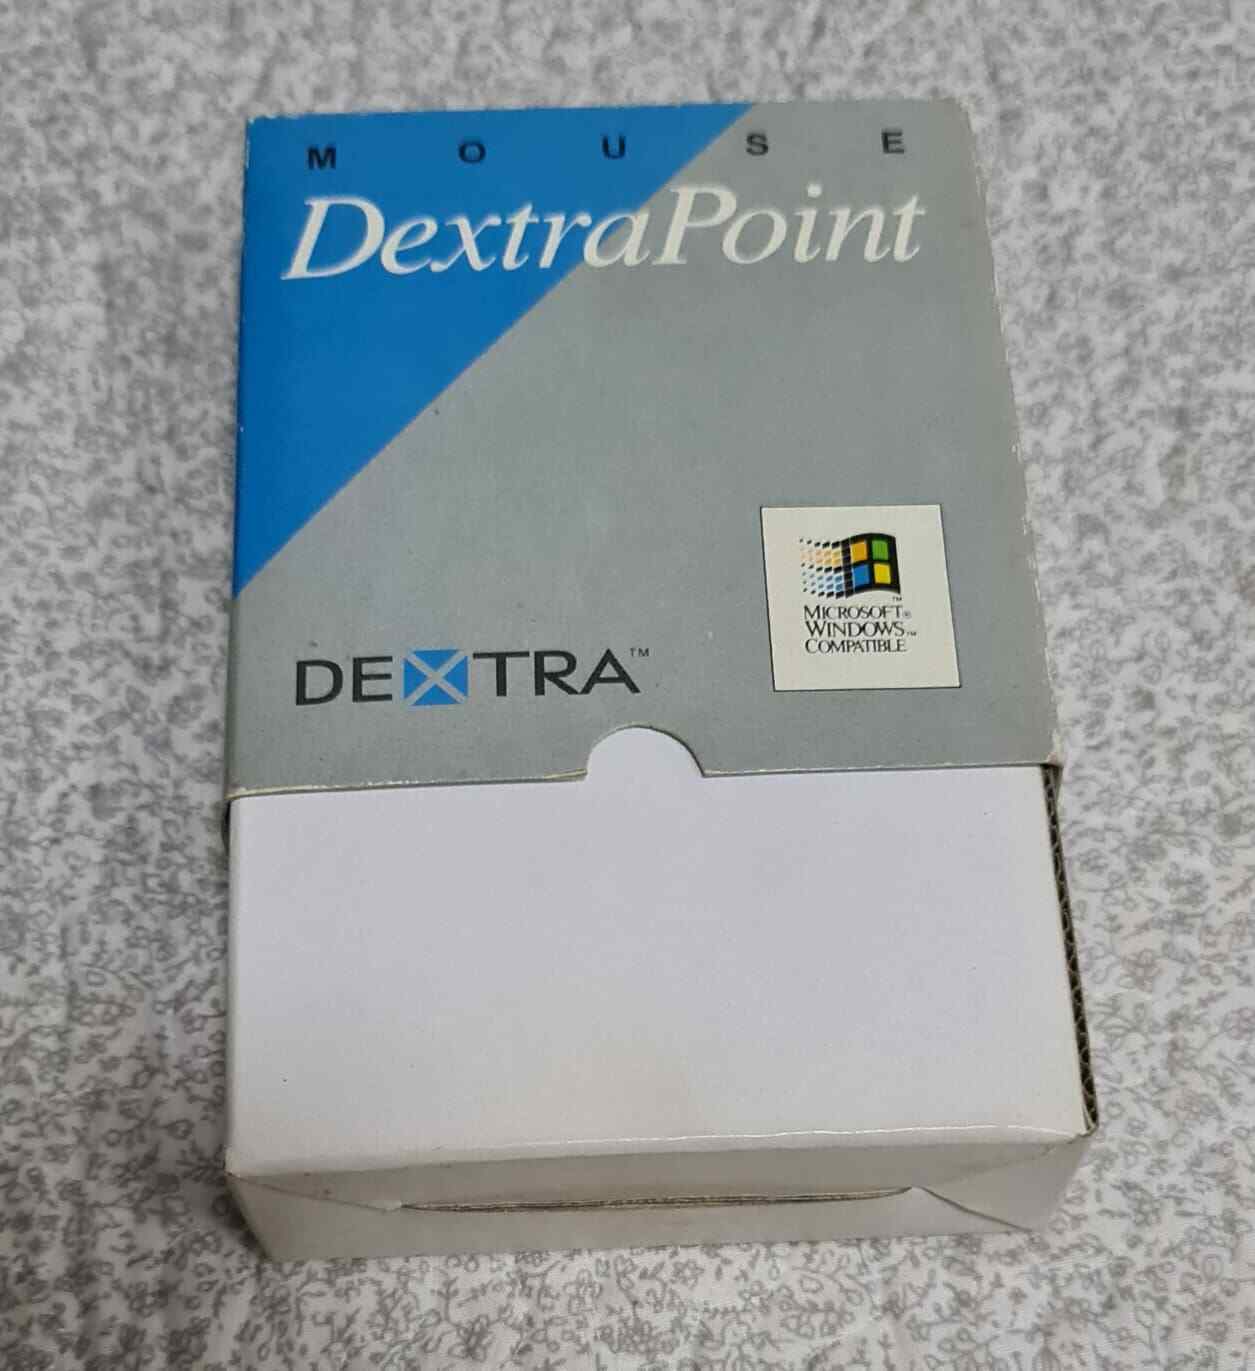 Vintage Dextra point DM-450 mouse empty box extremely rare - one of a kind